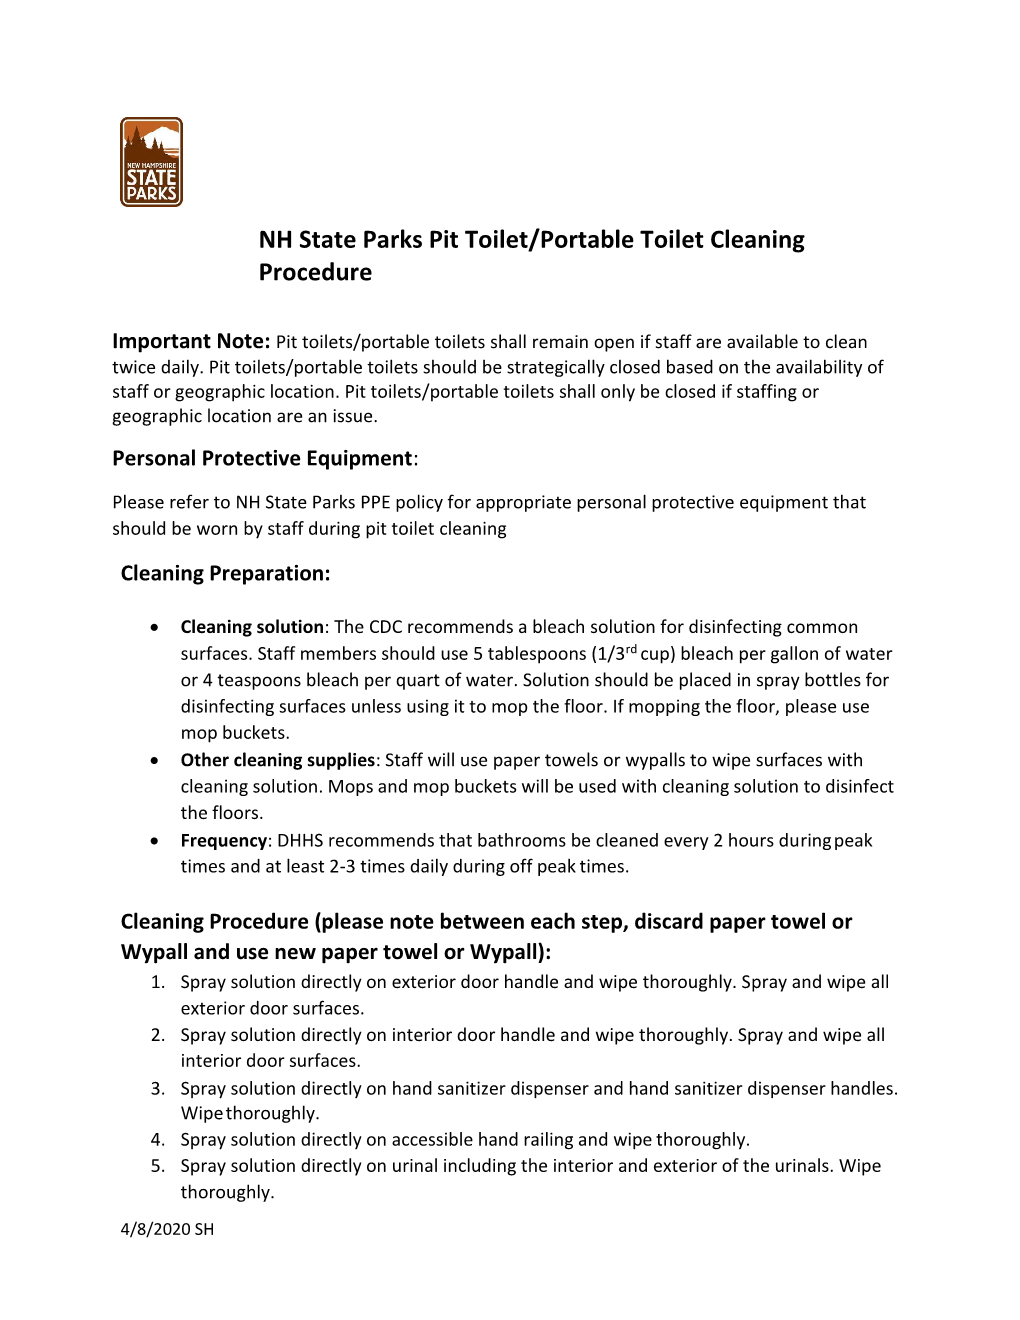 NH State Parks Pit Toilet/Portable Toilet Cleaning Procedure